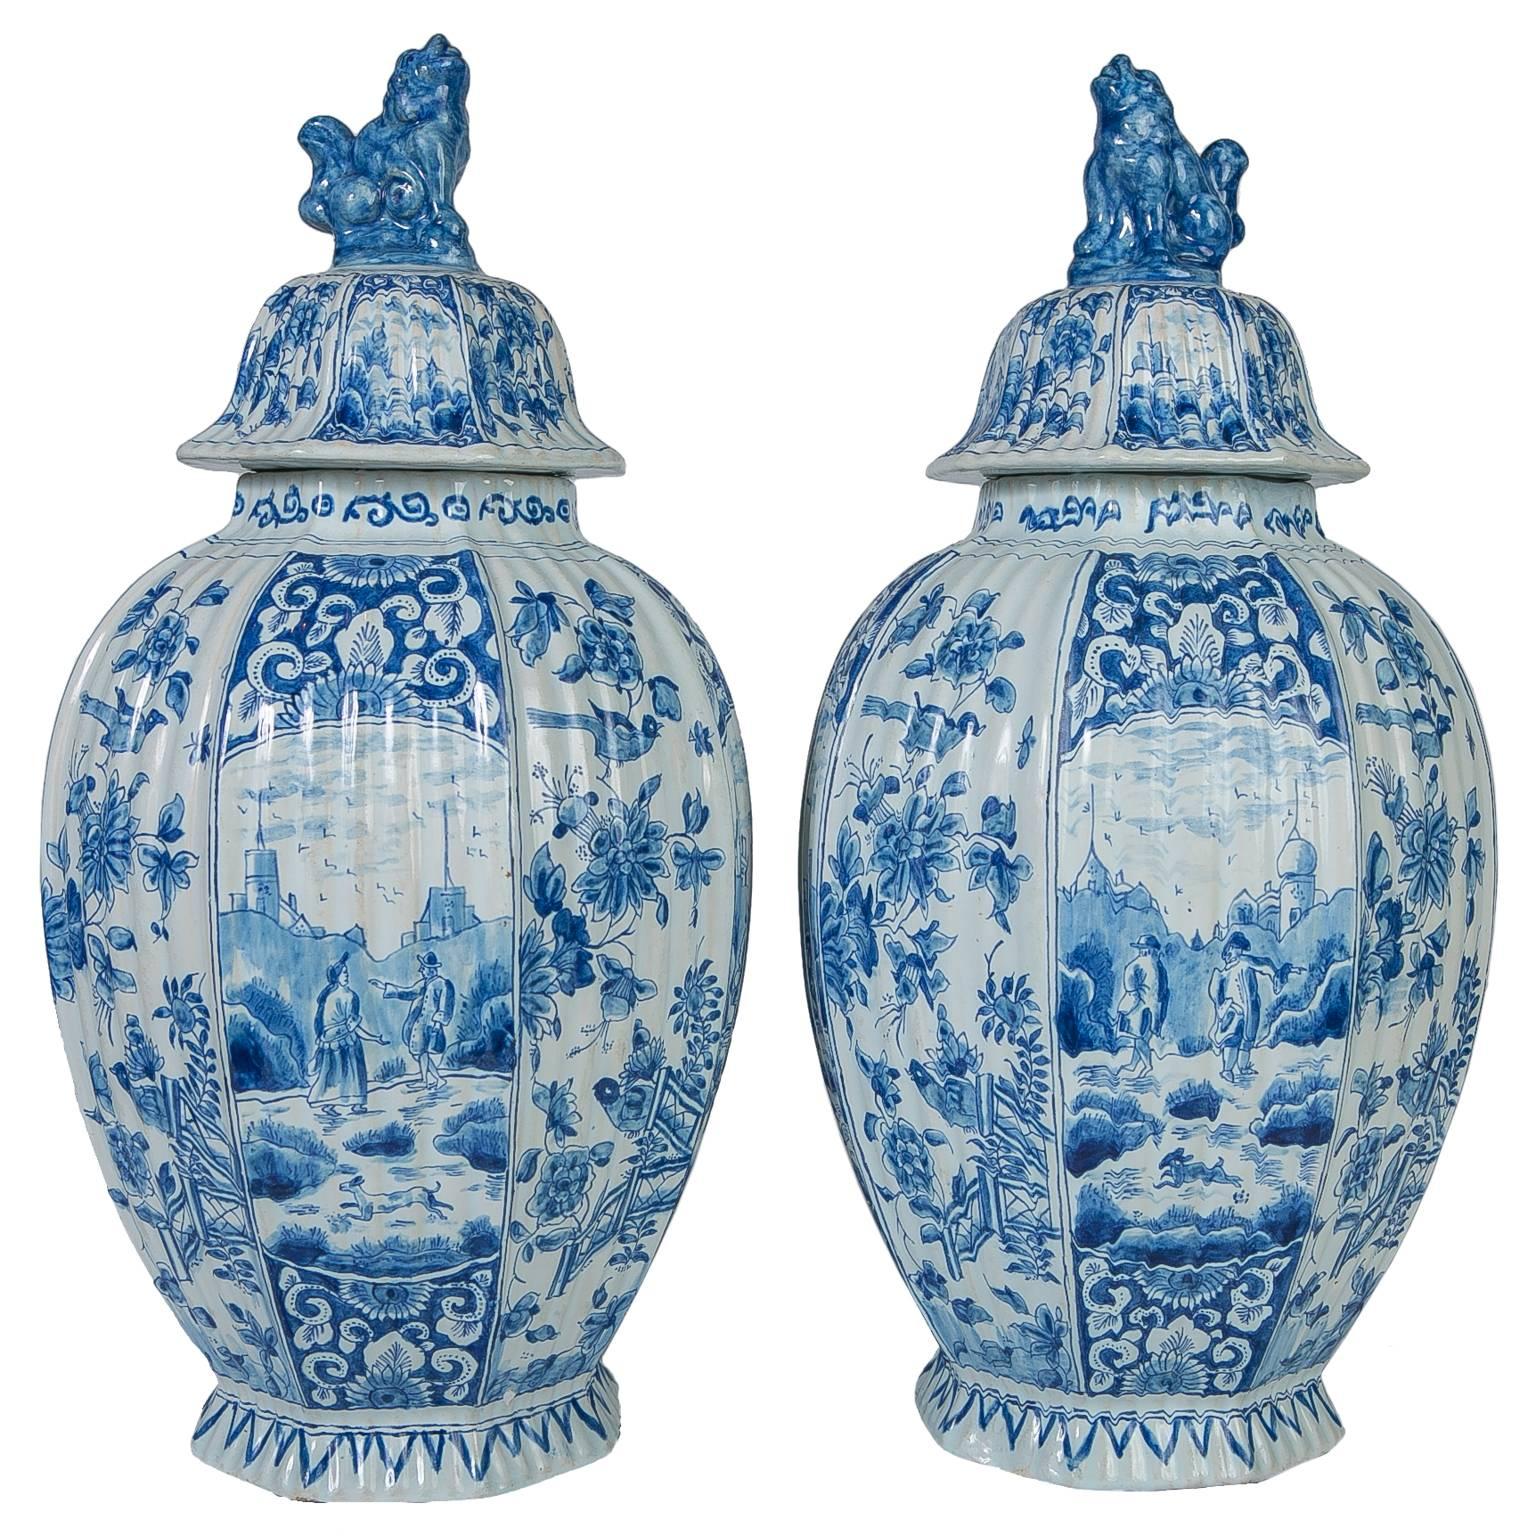  Pair of Blue and White Delft Jars